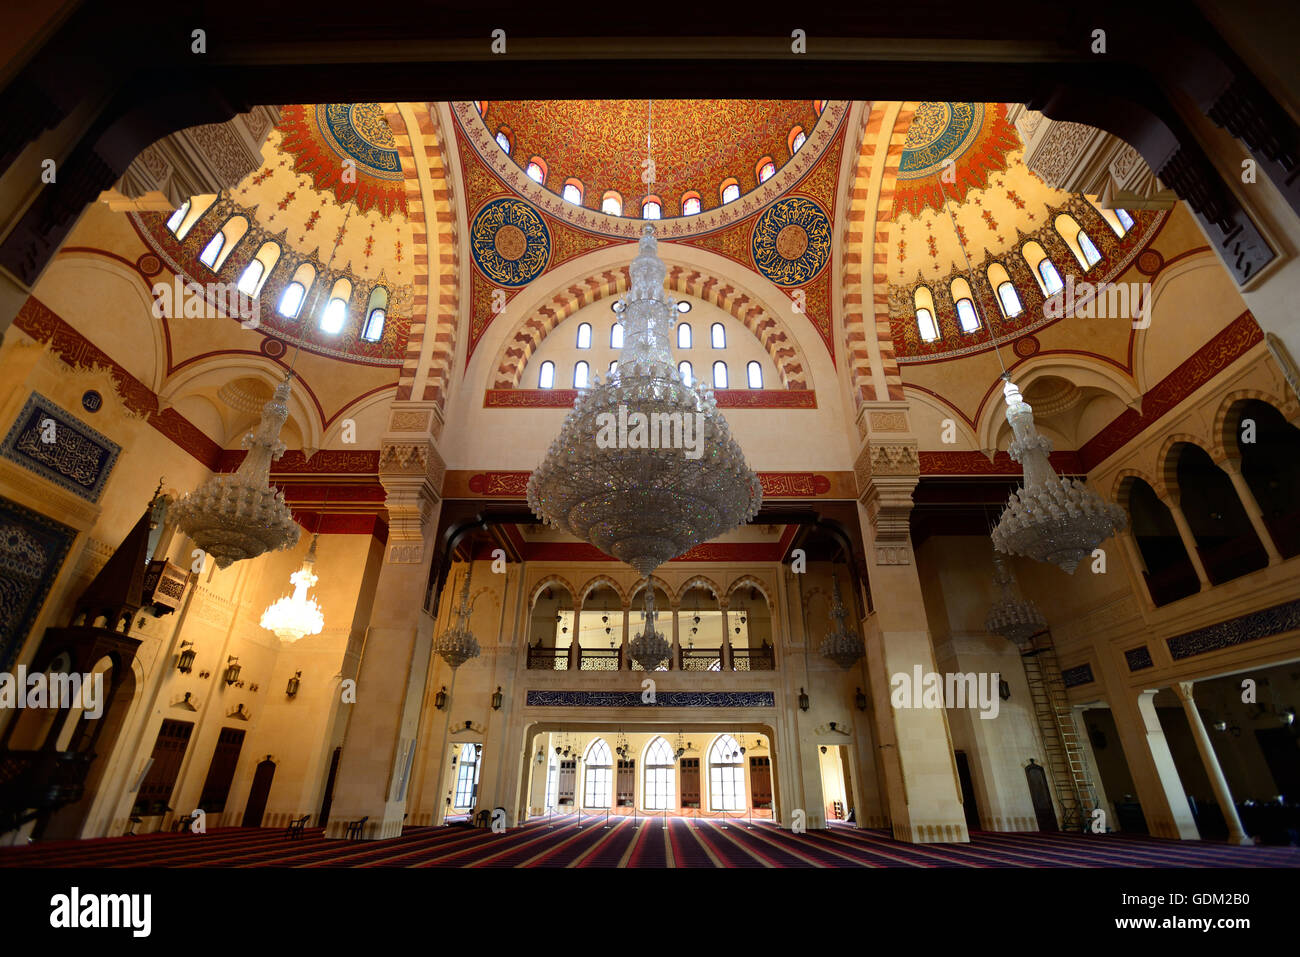 Lebanon, Beirut: Martyrs' Square (LF)Inside Mohammed al-Amin Mosque at Beirut's Matyr's Square (Place des Martyrs). This  blue-domed mosque has four minarets that stand 65m high.  Slain former prime minister Rafiq Hariri is buried outside  the mosque. Stock Photo